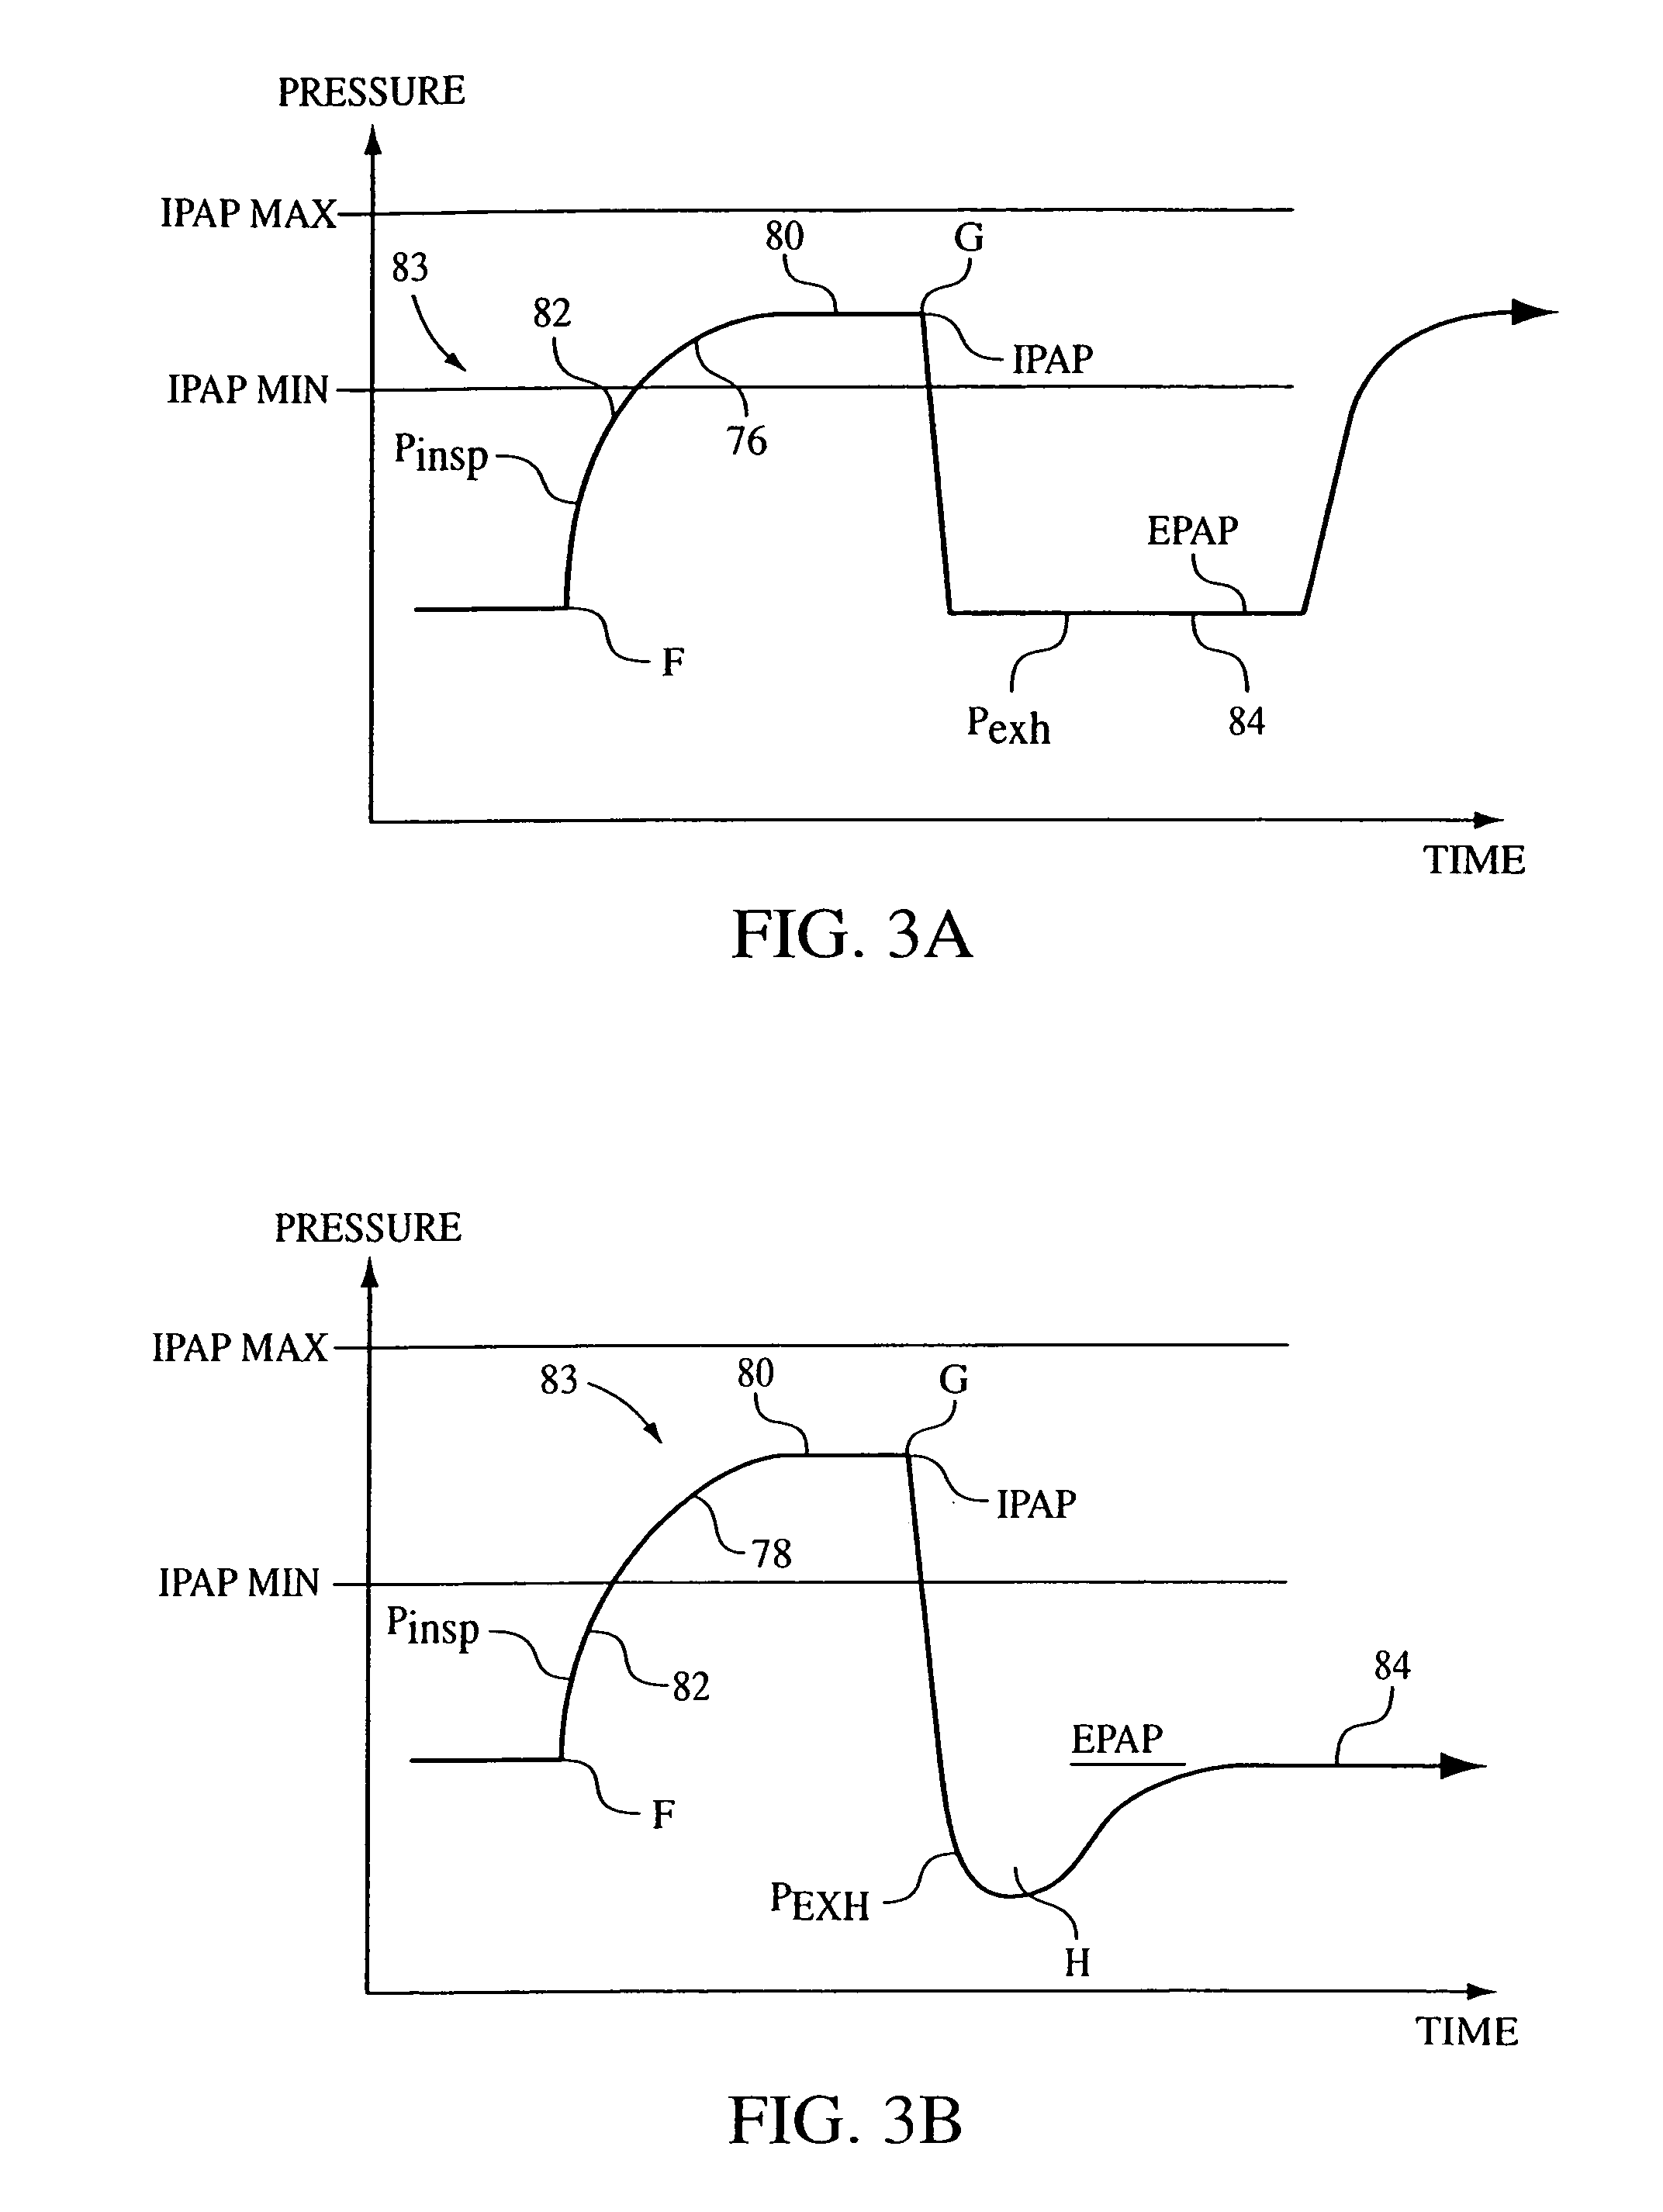 Method and apparatus for treating Cheyne-Stokes respiration